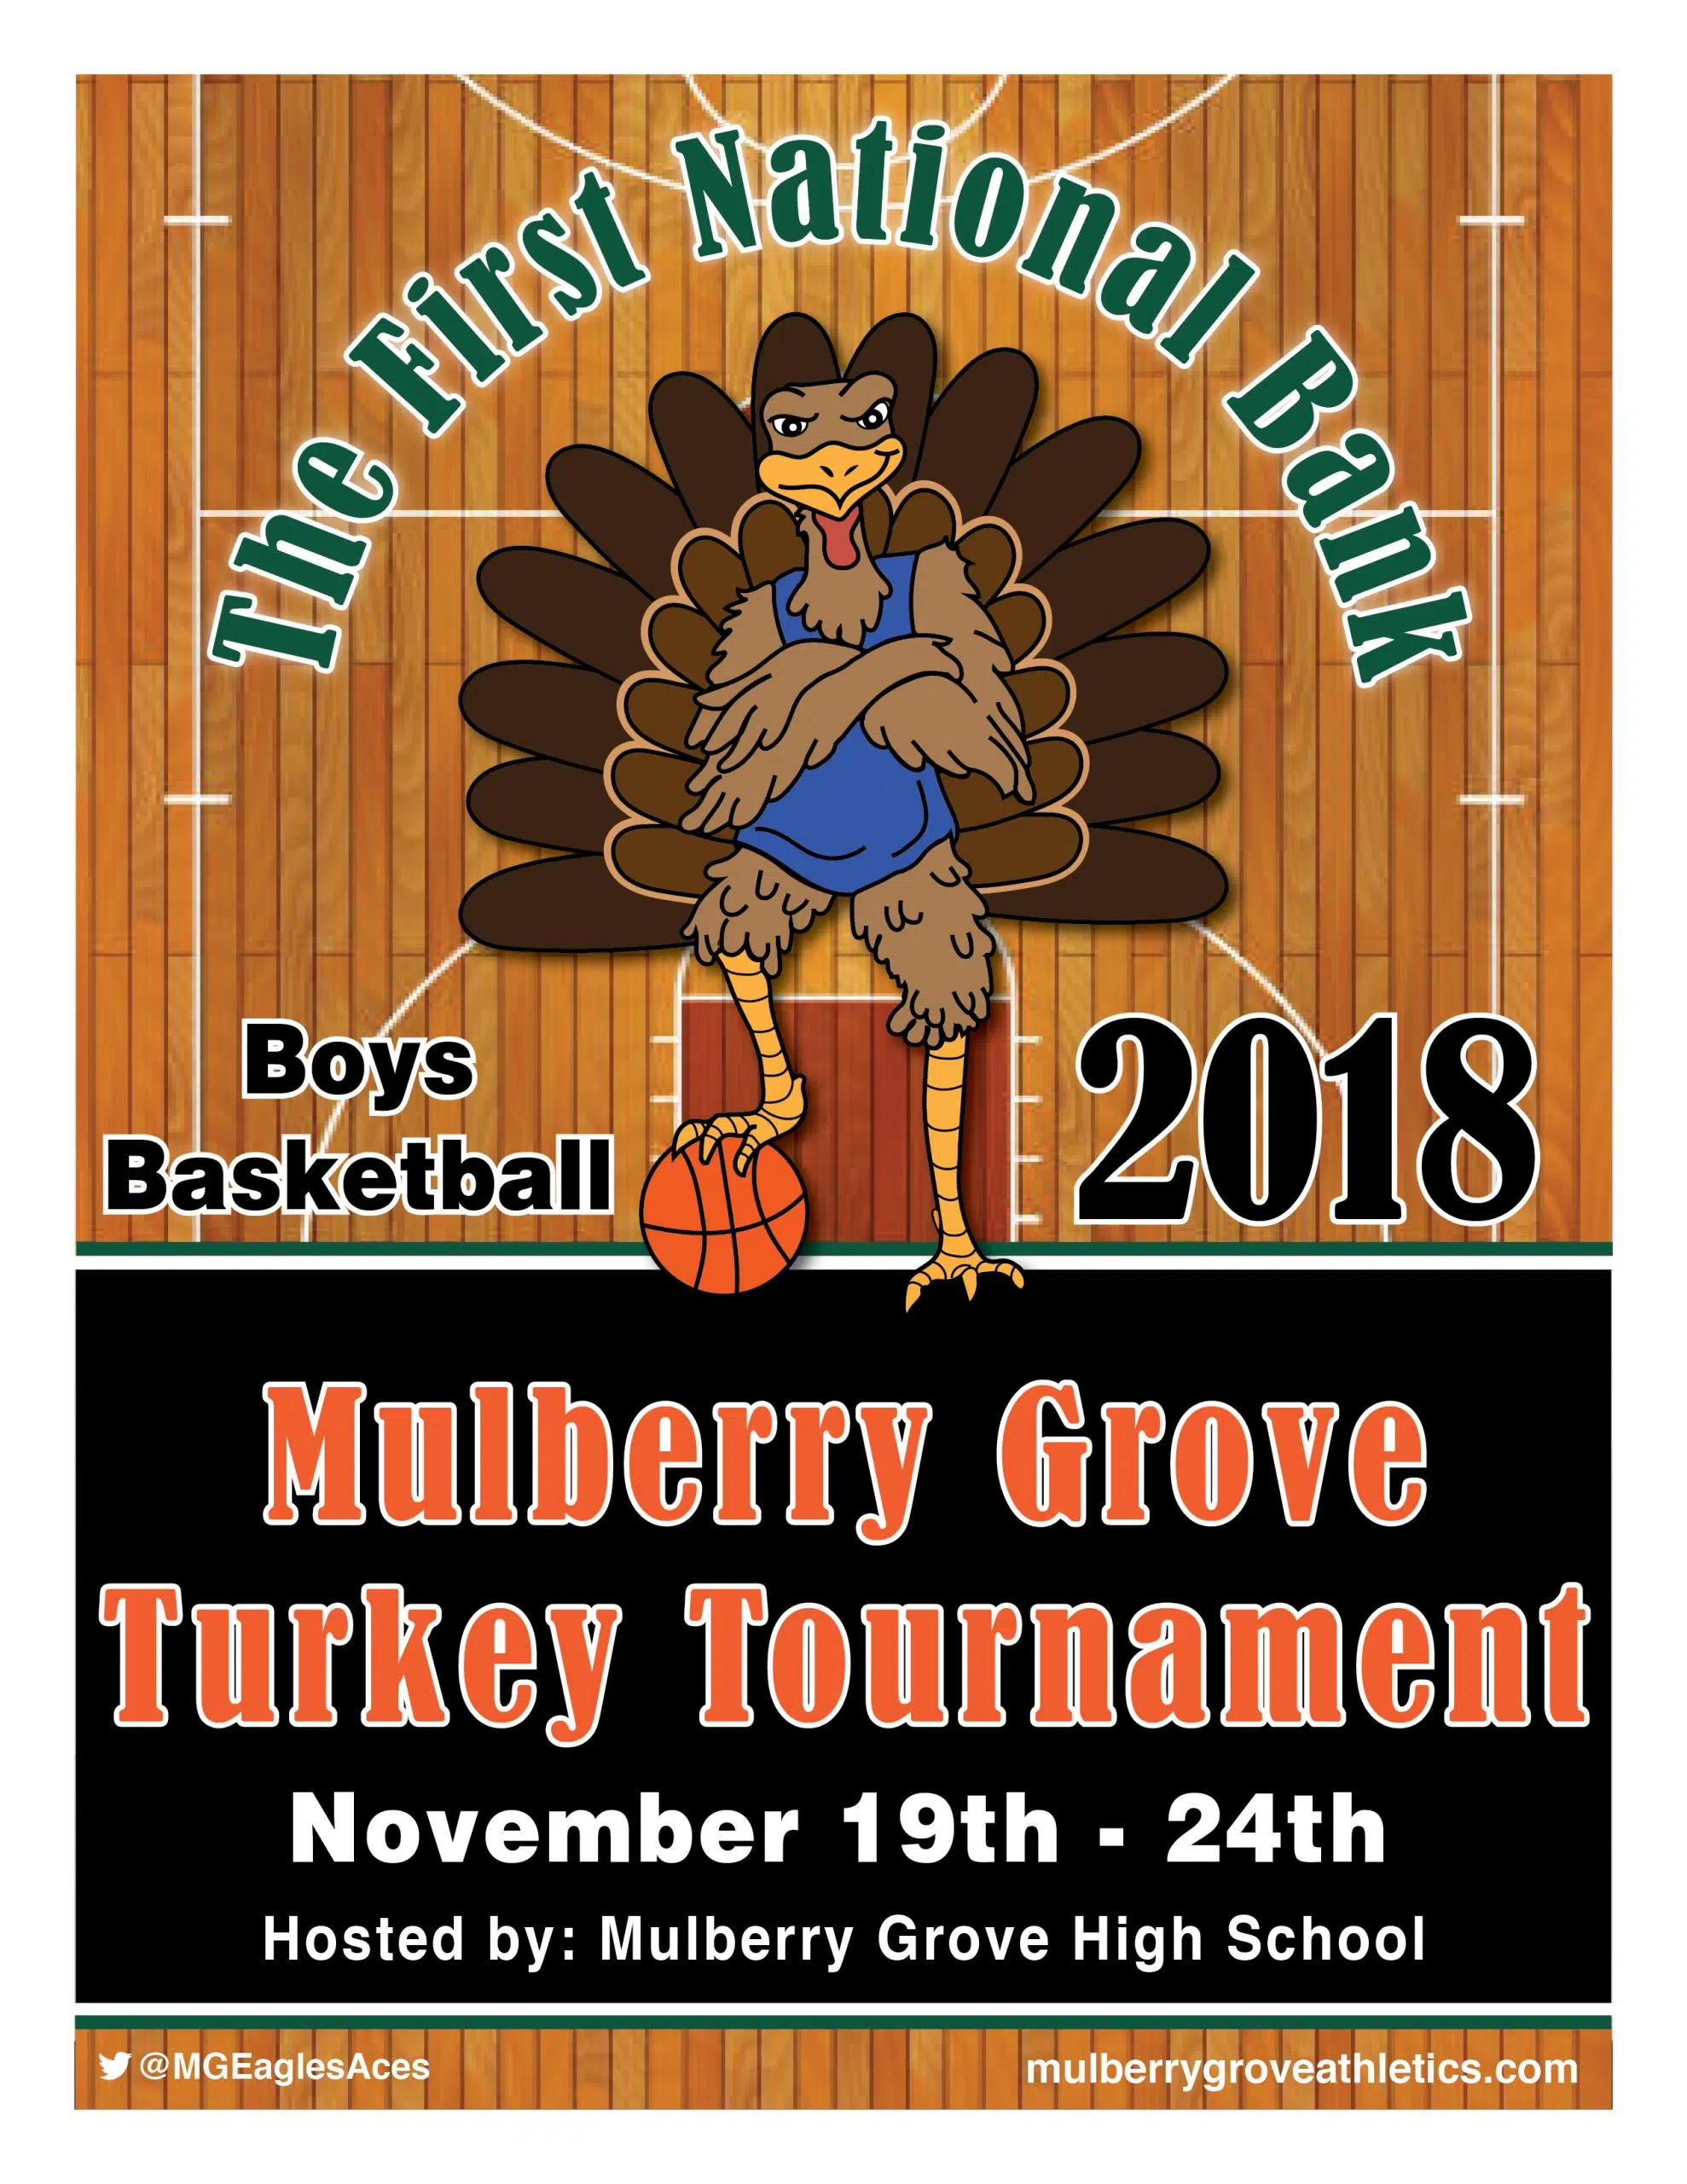 CHBC, South Central and SEB Win on Night One of Mulberry Grove Thanksgiving Tournament